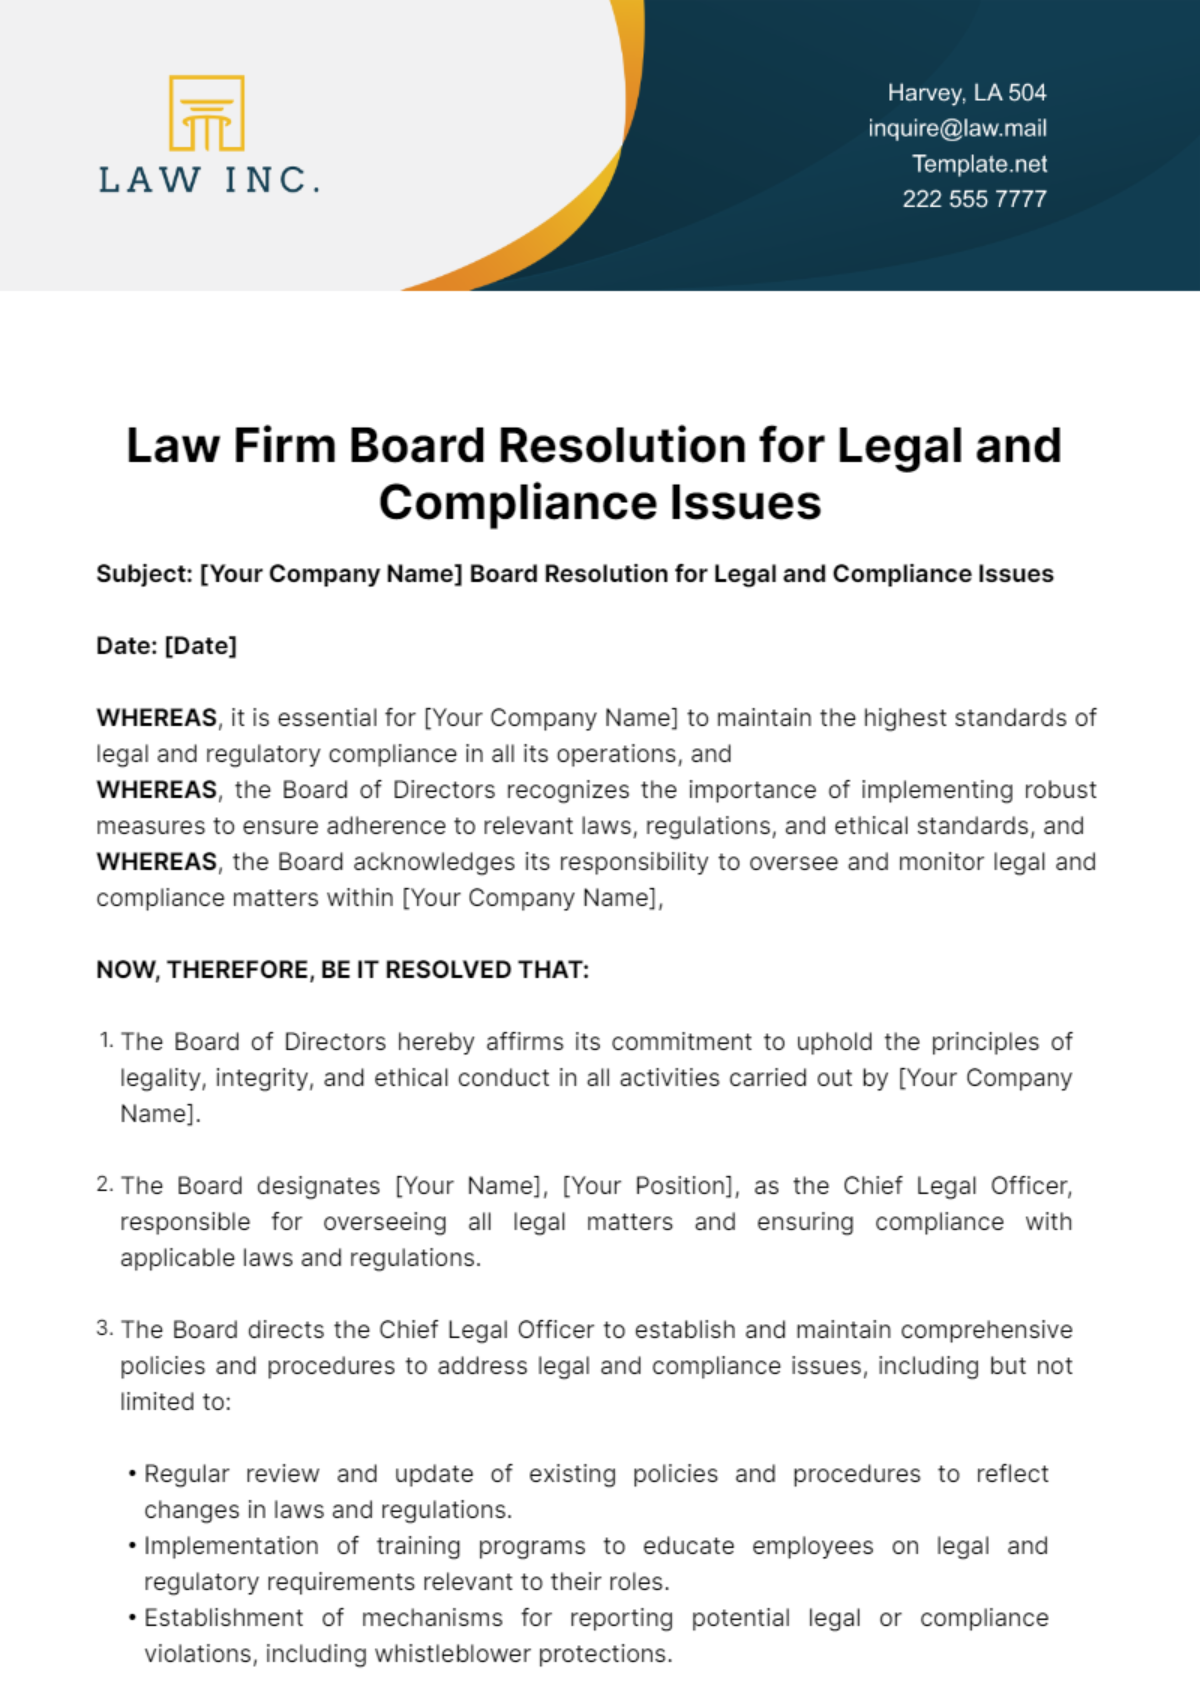 Free Law Firm Board Resolution for Legal and Compliance Issues Template